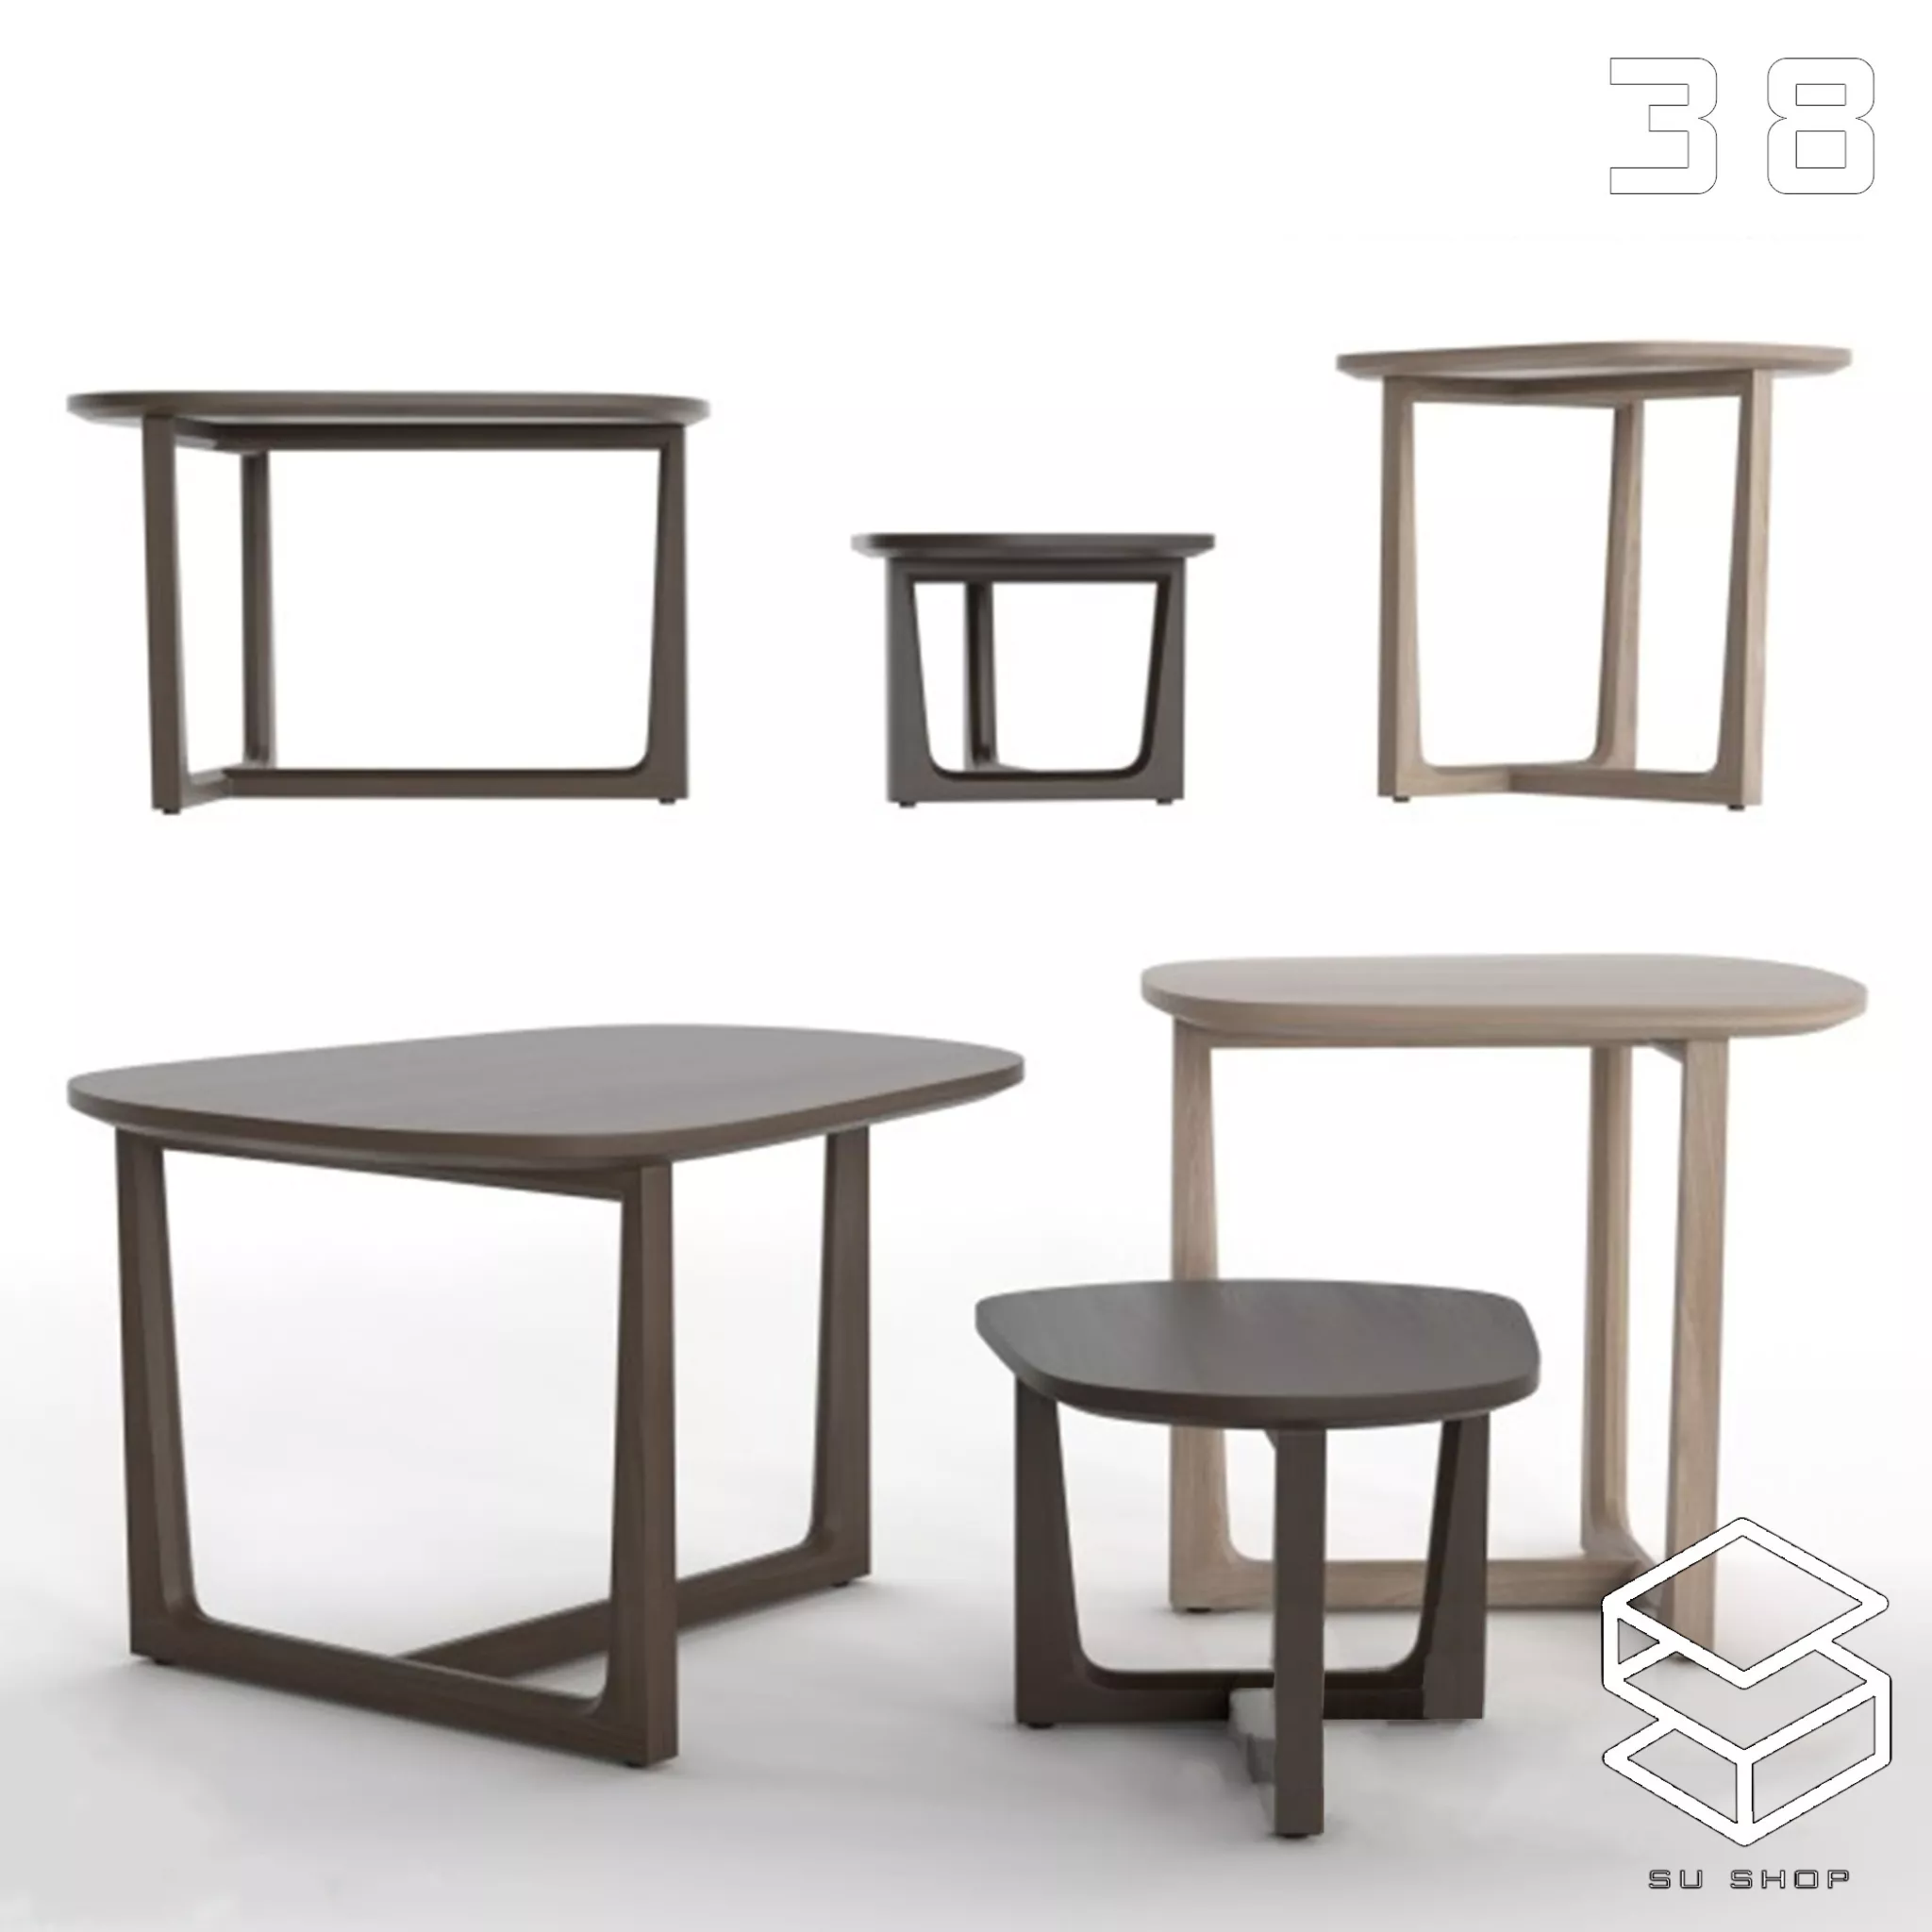 MODERN TEA TABLE - SKETCHUP 3D MODEL - VRAY OR ENSCAPE - ID15047